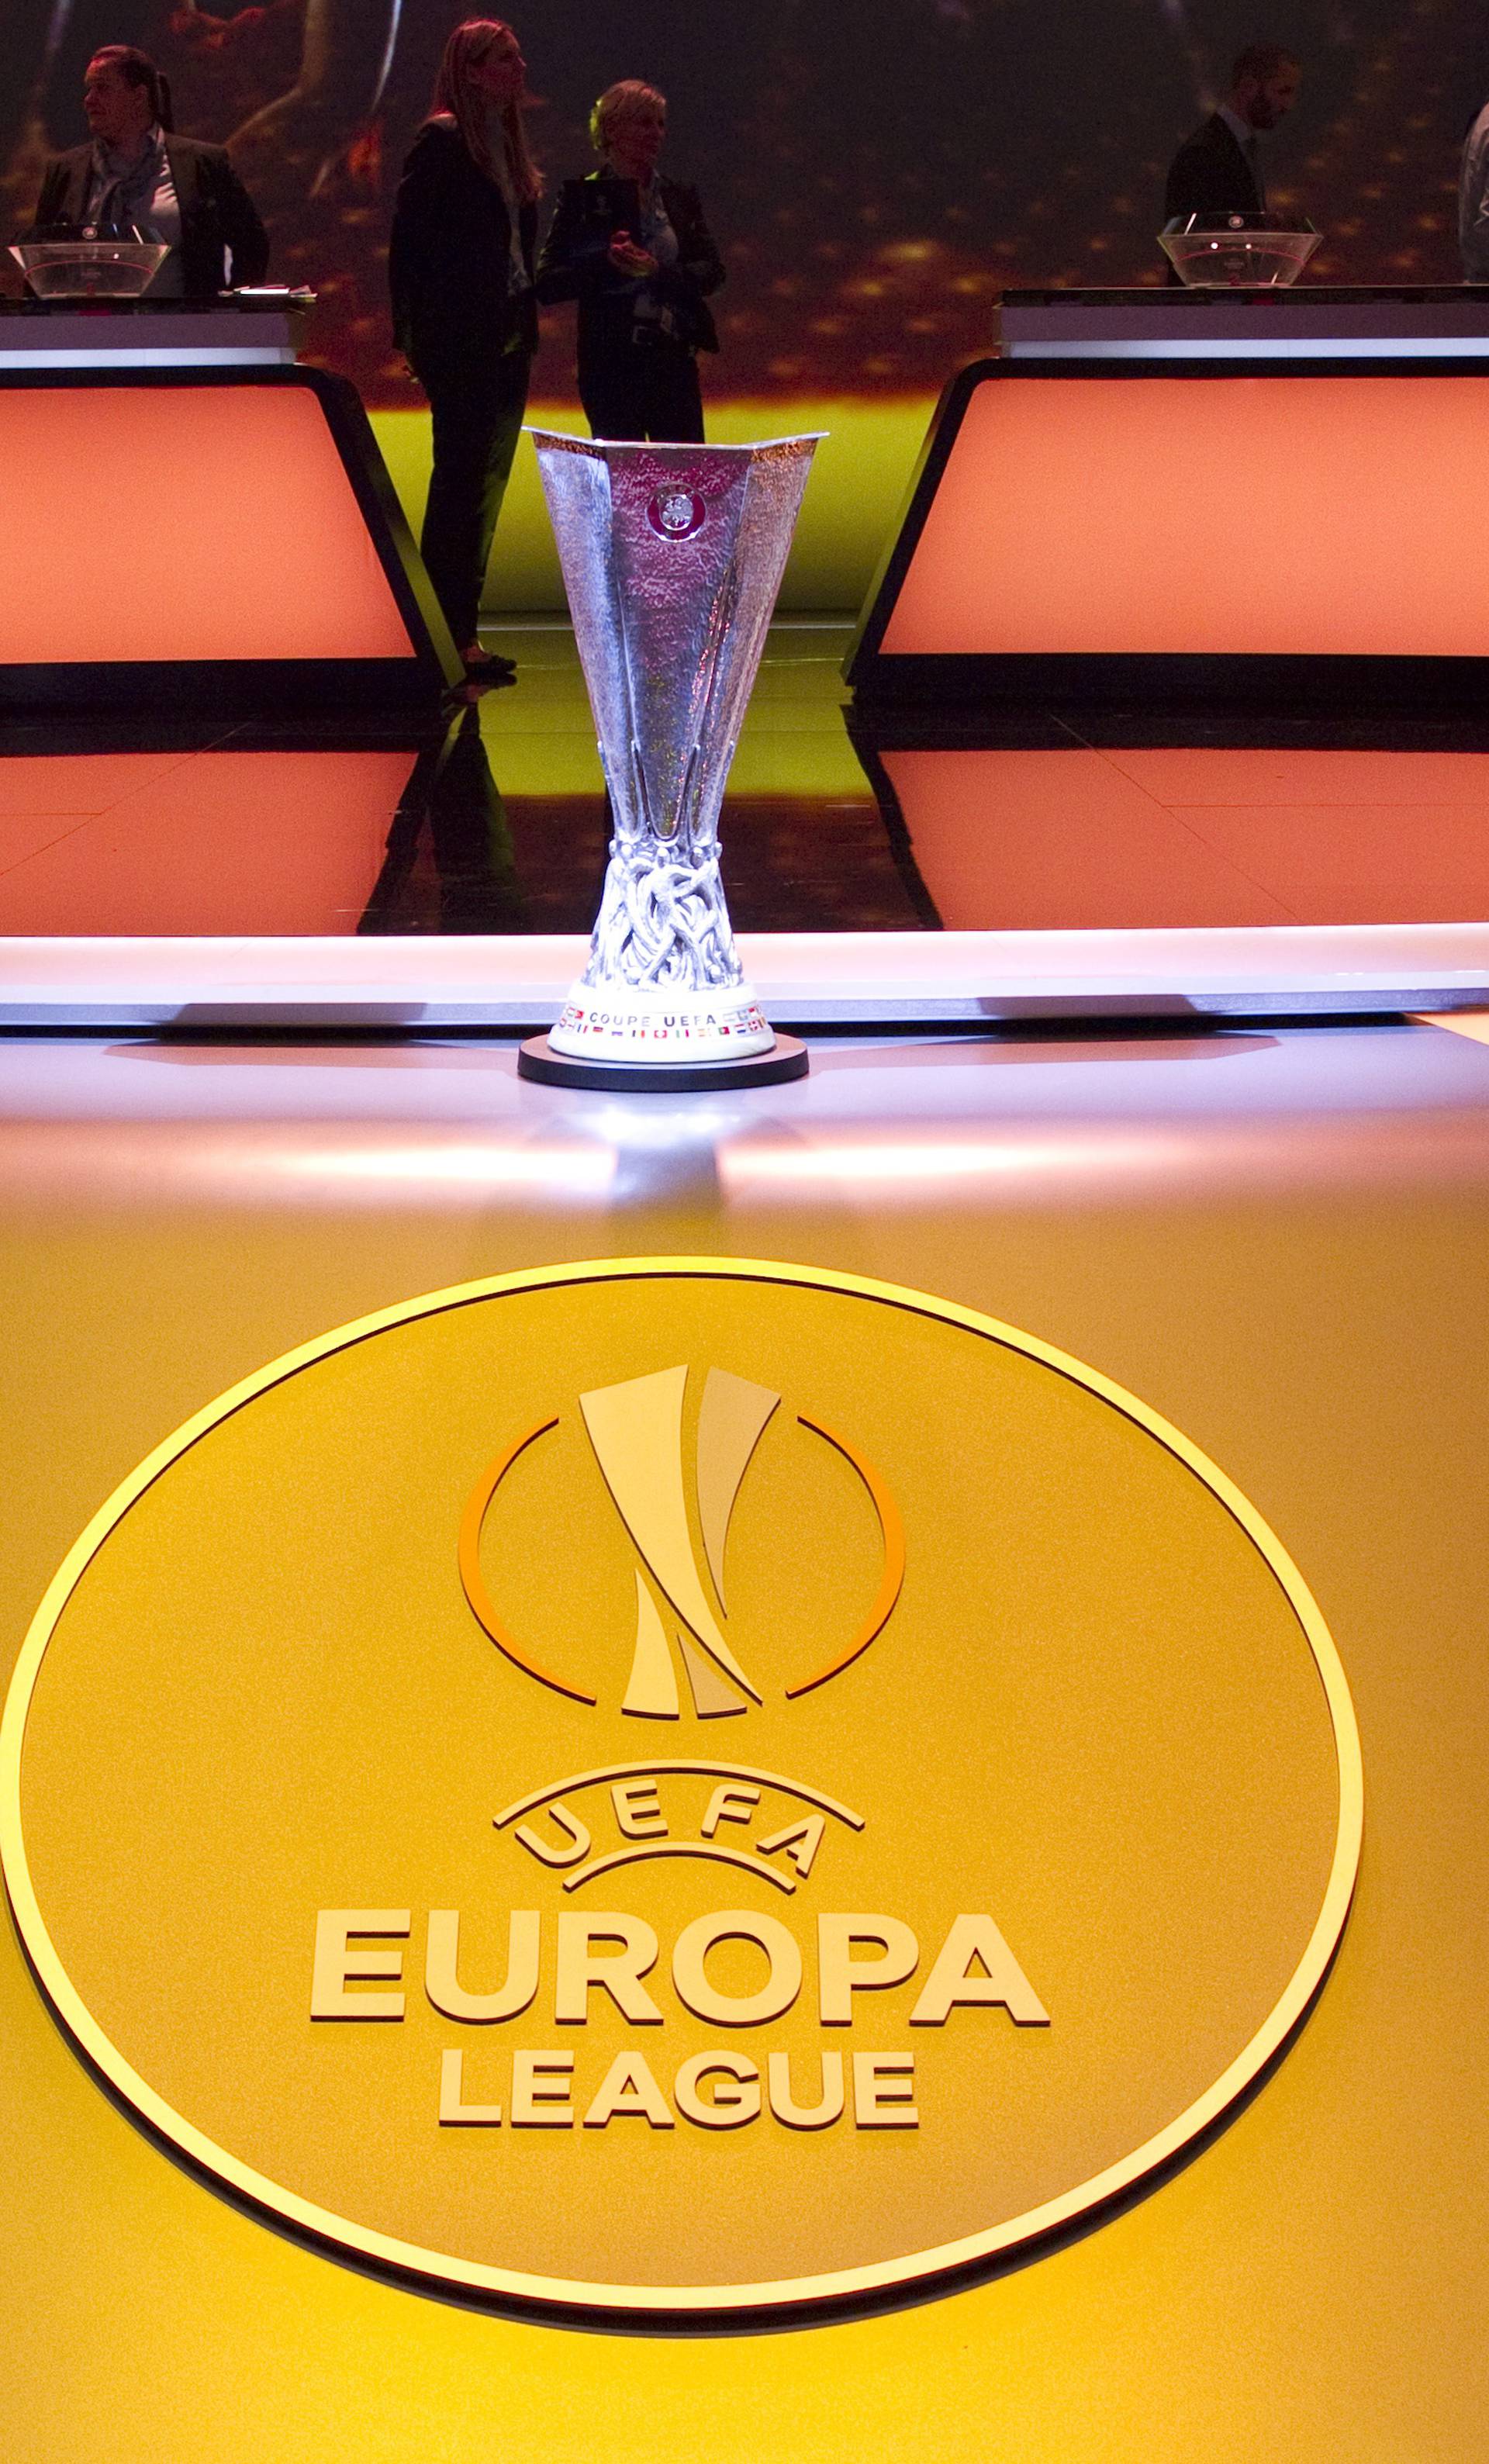 UEFA Europa League / Champions League Group Stage Draw in Monaco 2017/2018